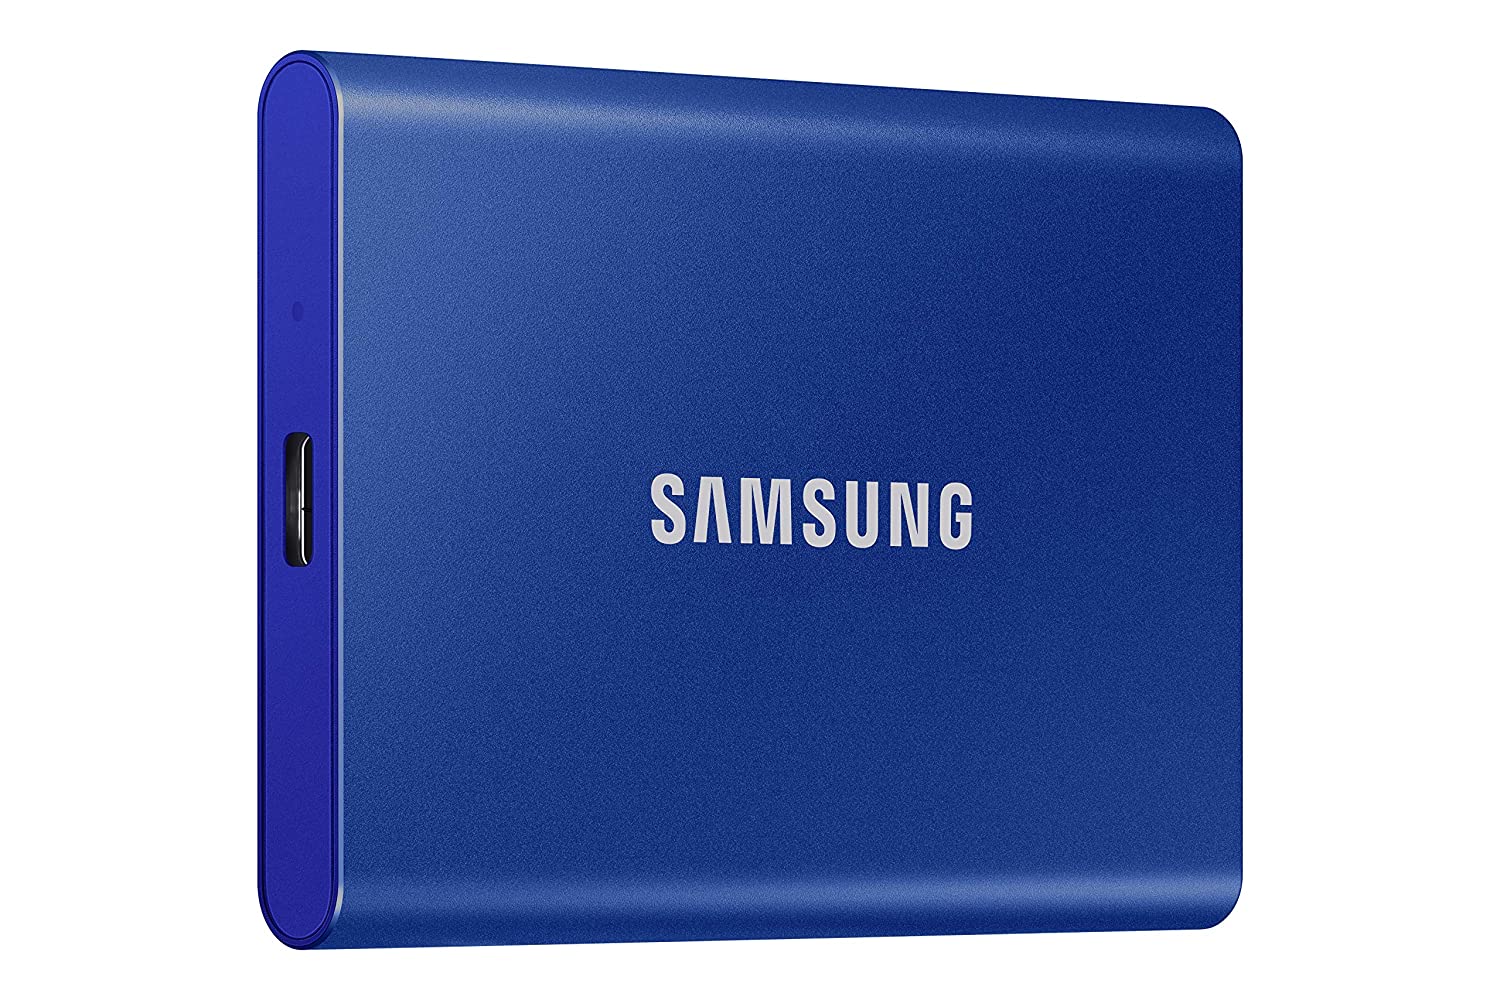 Samsung's T7 portable SSD in 1TB is cheaper than ever right now